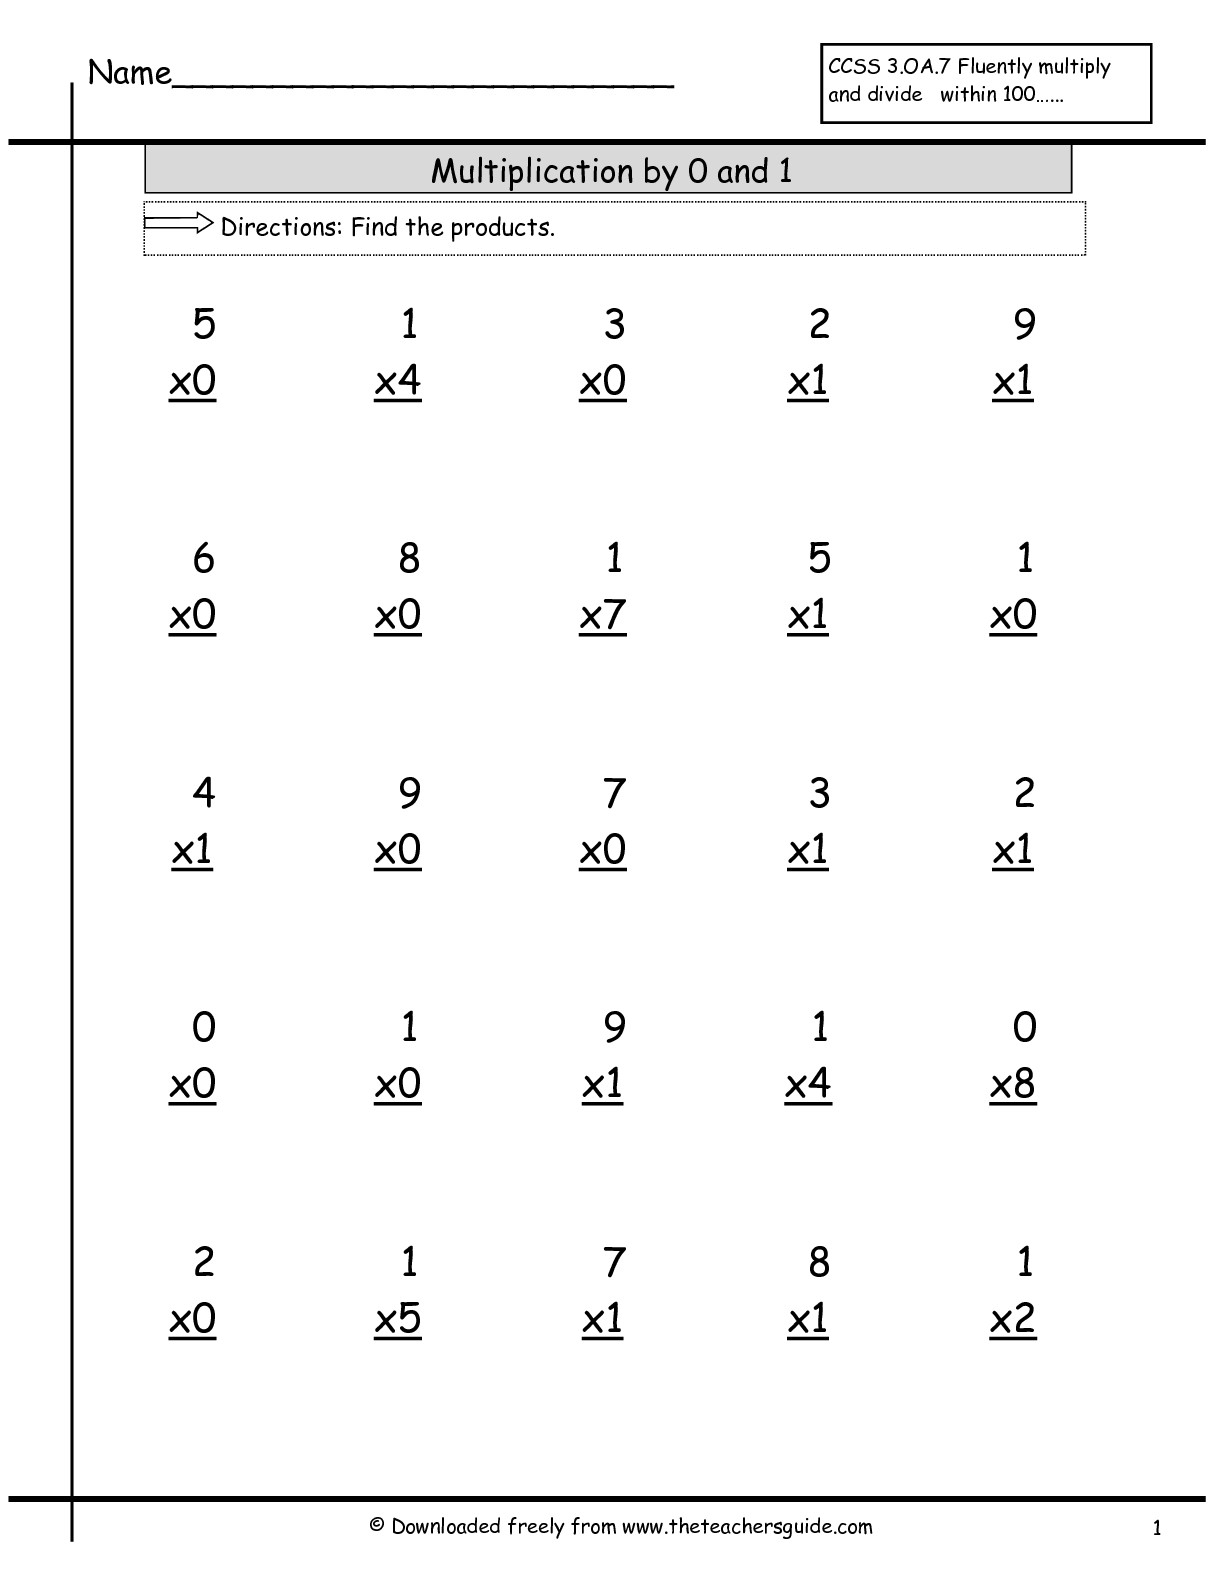 Multiplication Facts Worksheets From The Teacher&amp;#039;s Guide throughout Multiplication Printable 0